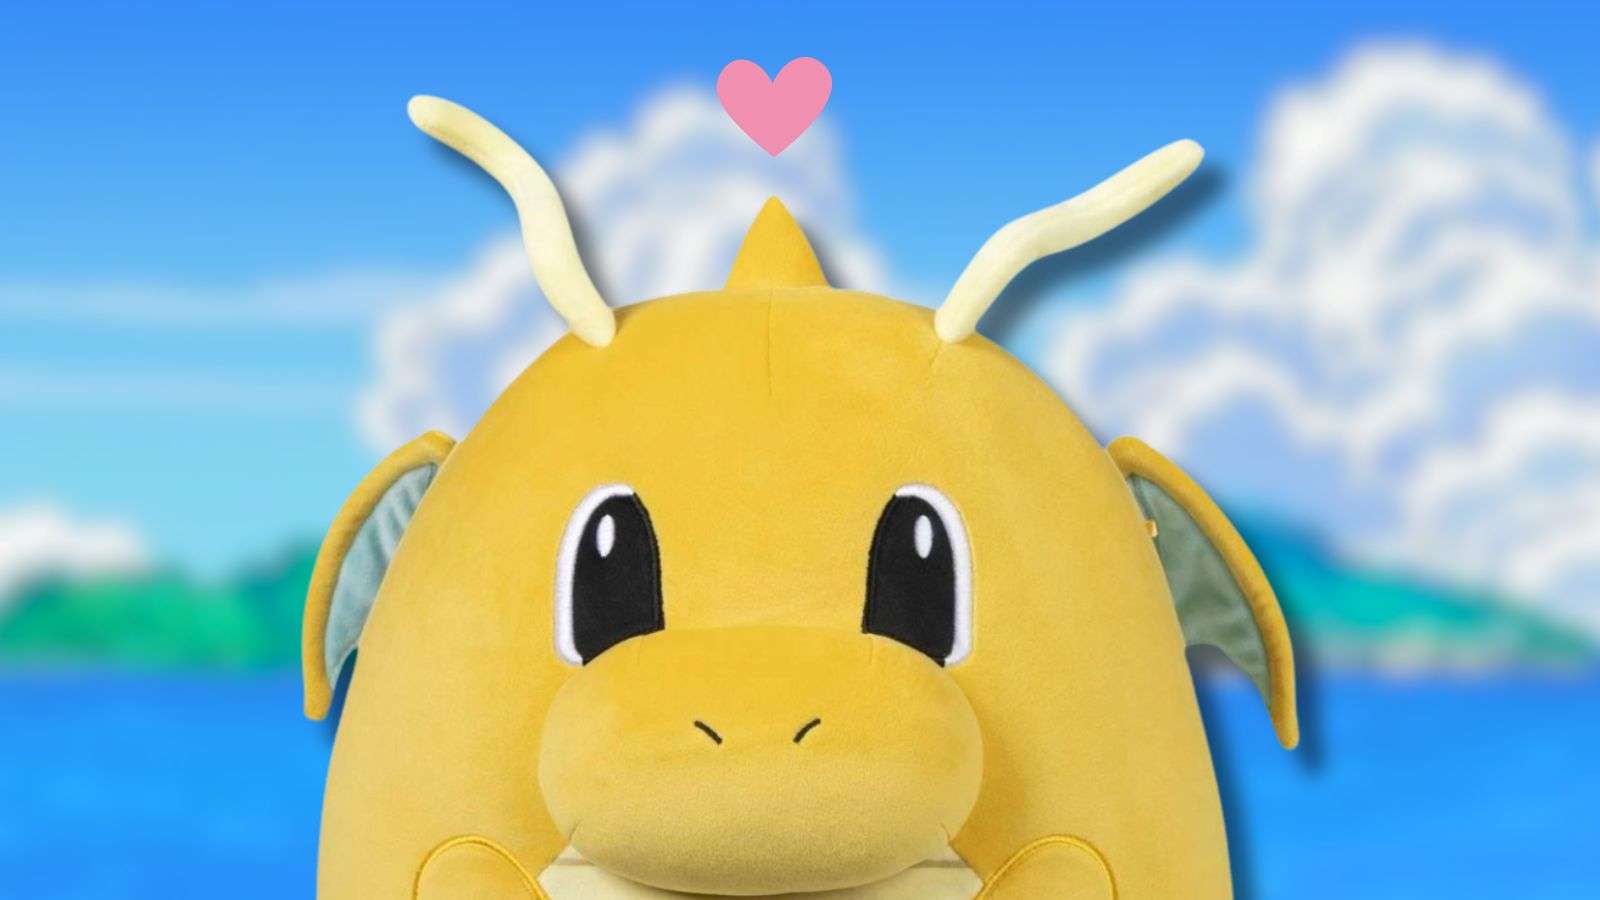 Dragonite Squishmallow with Pokemon anime background and loveheart.